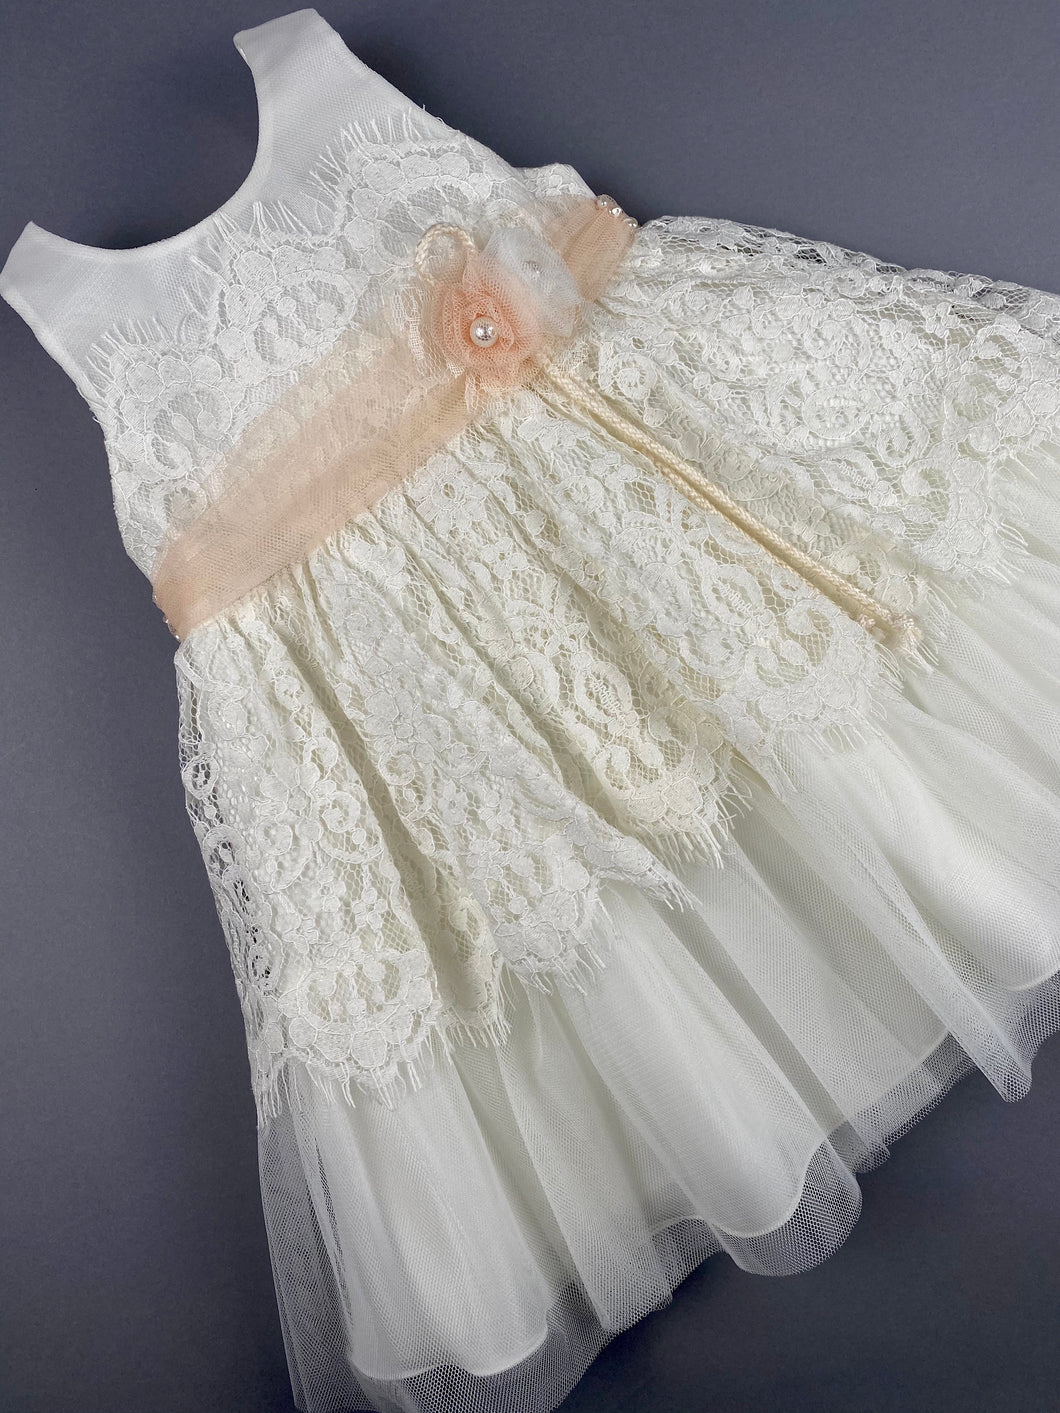 Dress 25 Girls Baptismal Christening Sleeveless  3pc Dress with Lace, matching Bolero and Hat. Made in Greece exclusively for Rosies Collections.